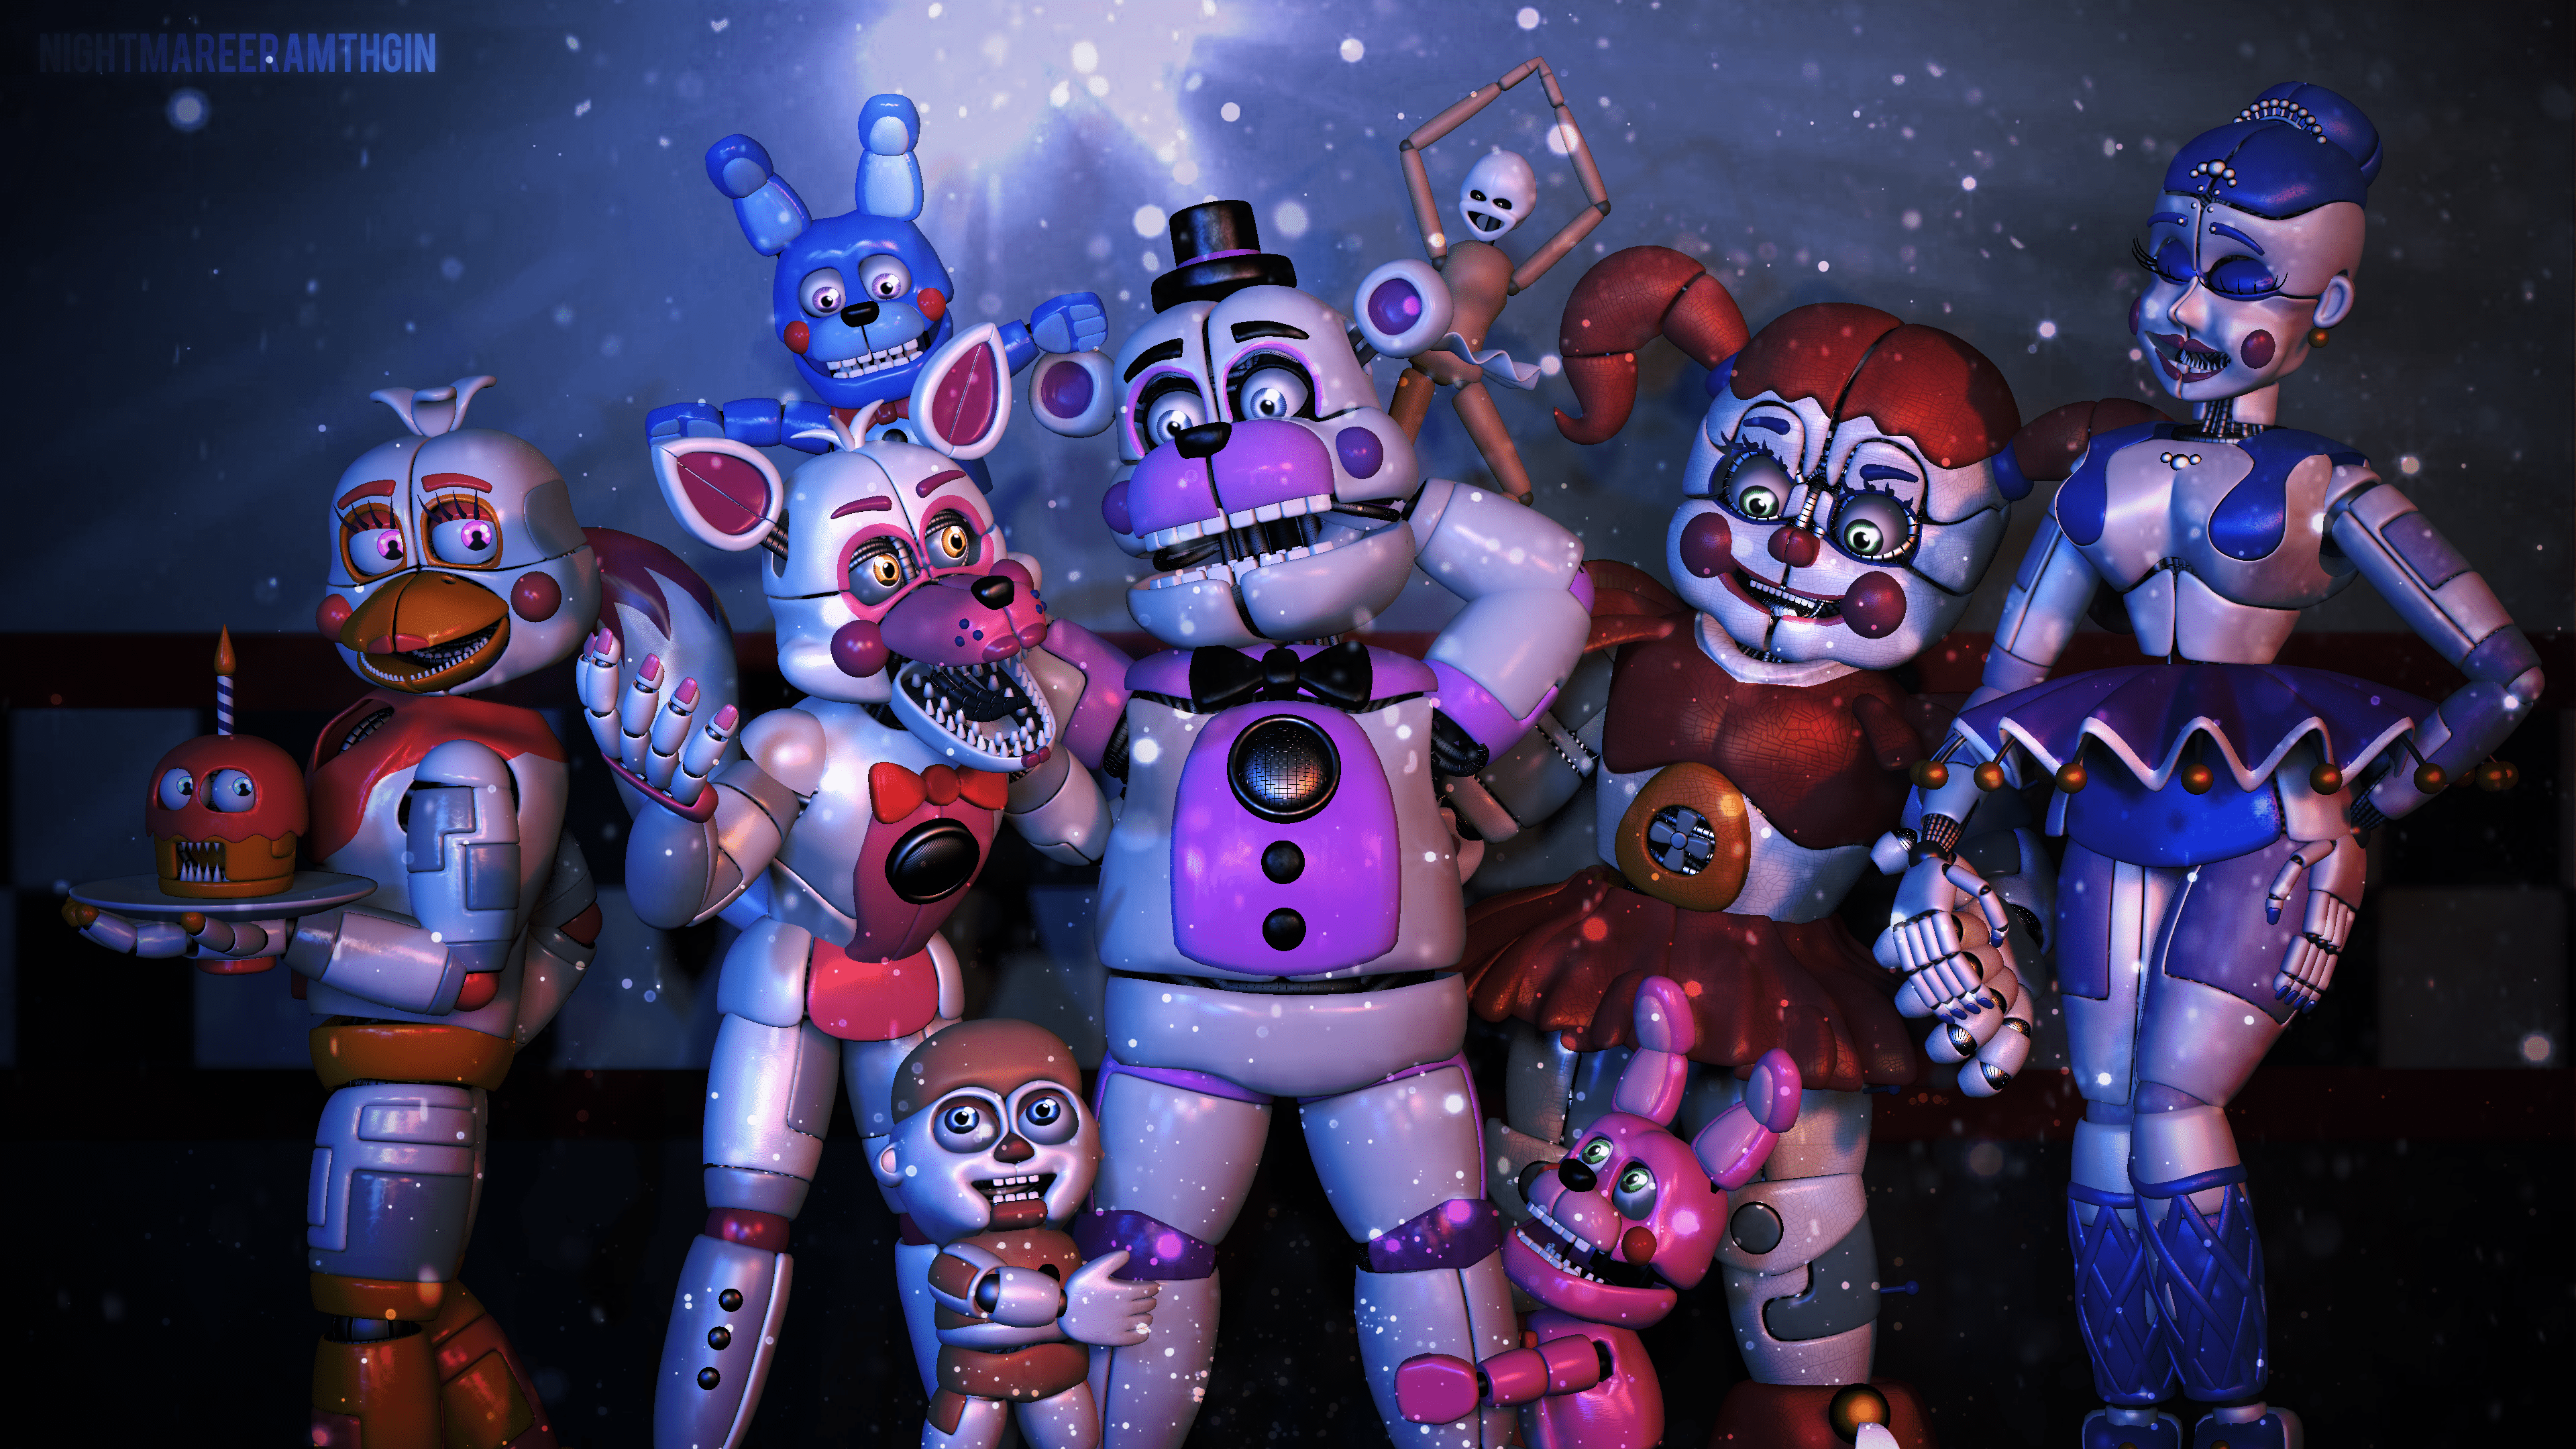 Five Nights at Freddy's: Sister Location - Baby Wall Poster, 22.375 x 34  